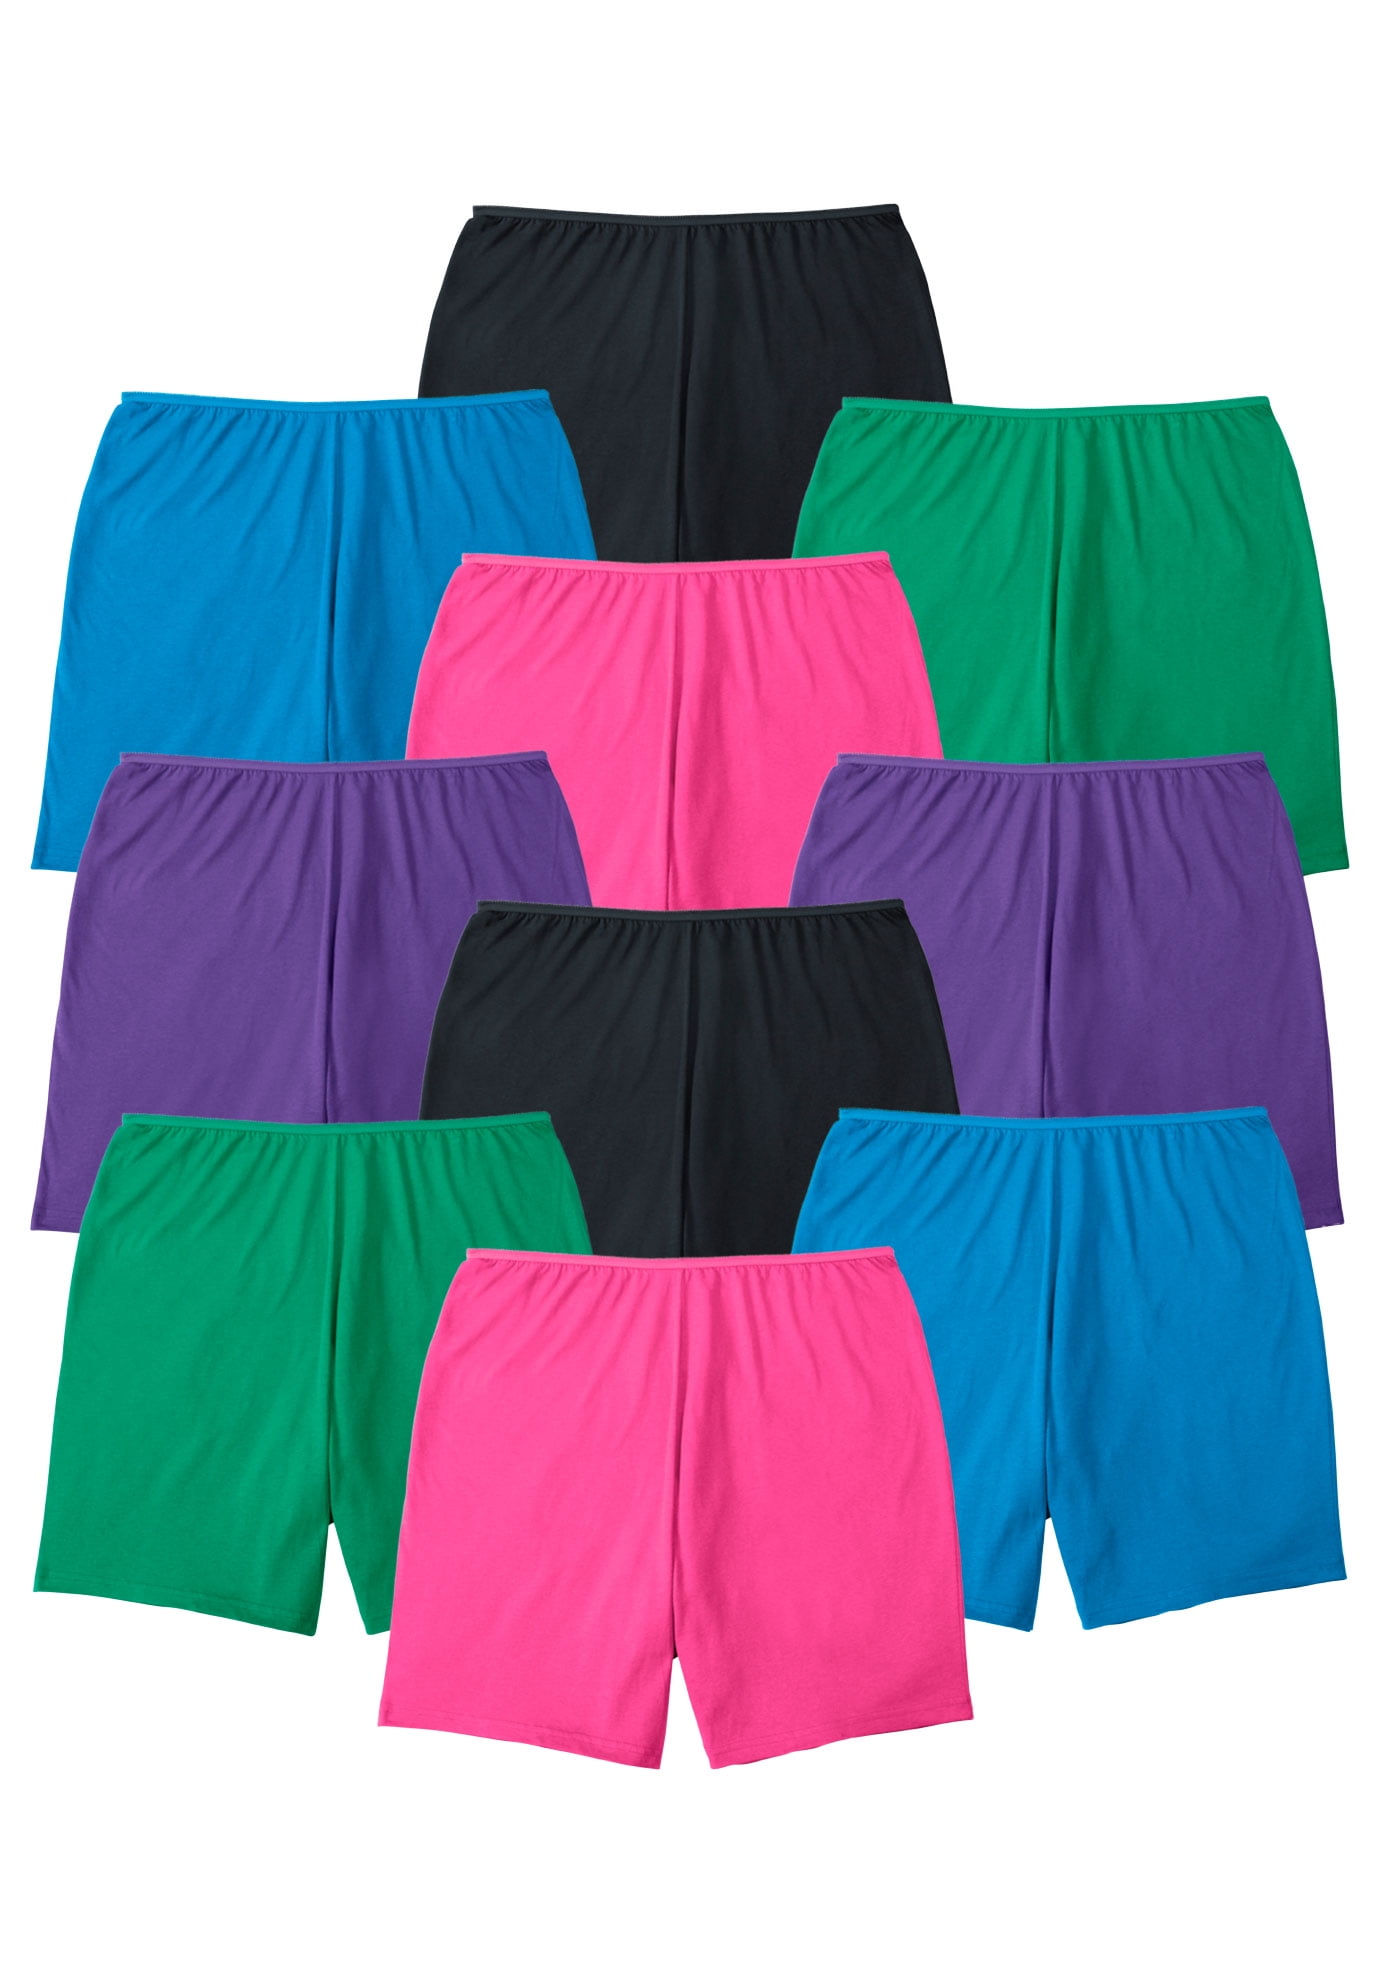 15 Basic Pack Comfort Choice Womens Plus Size 5-Pack Cotton Boxer 